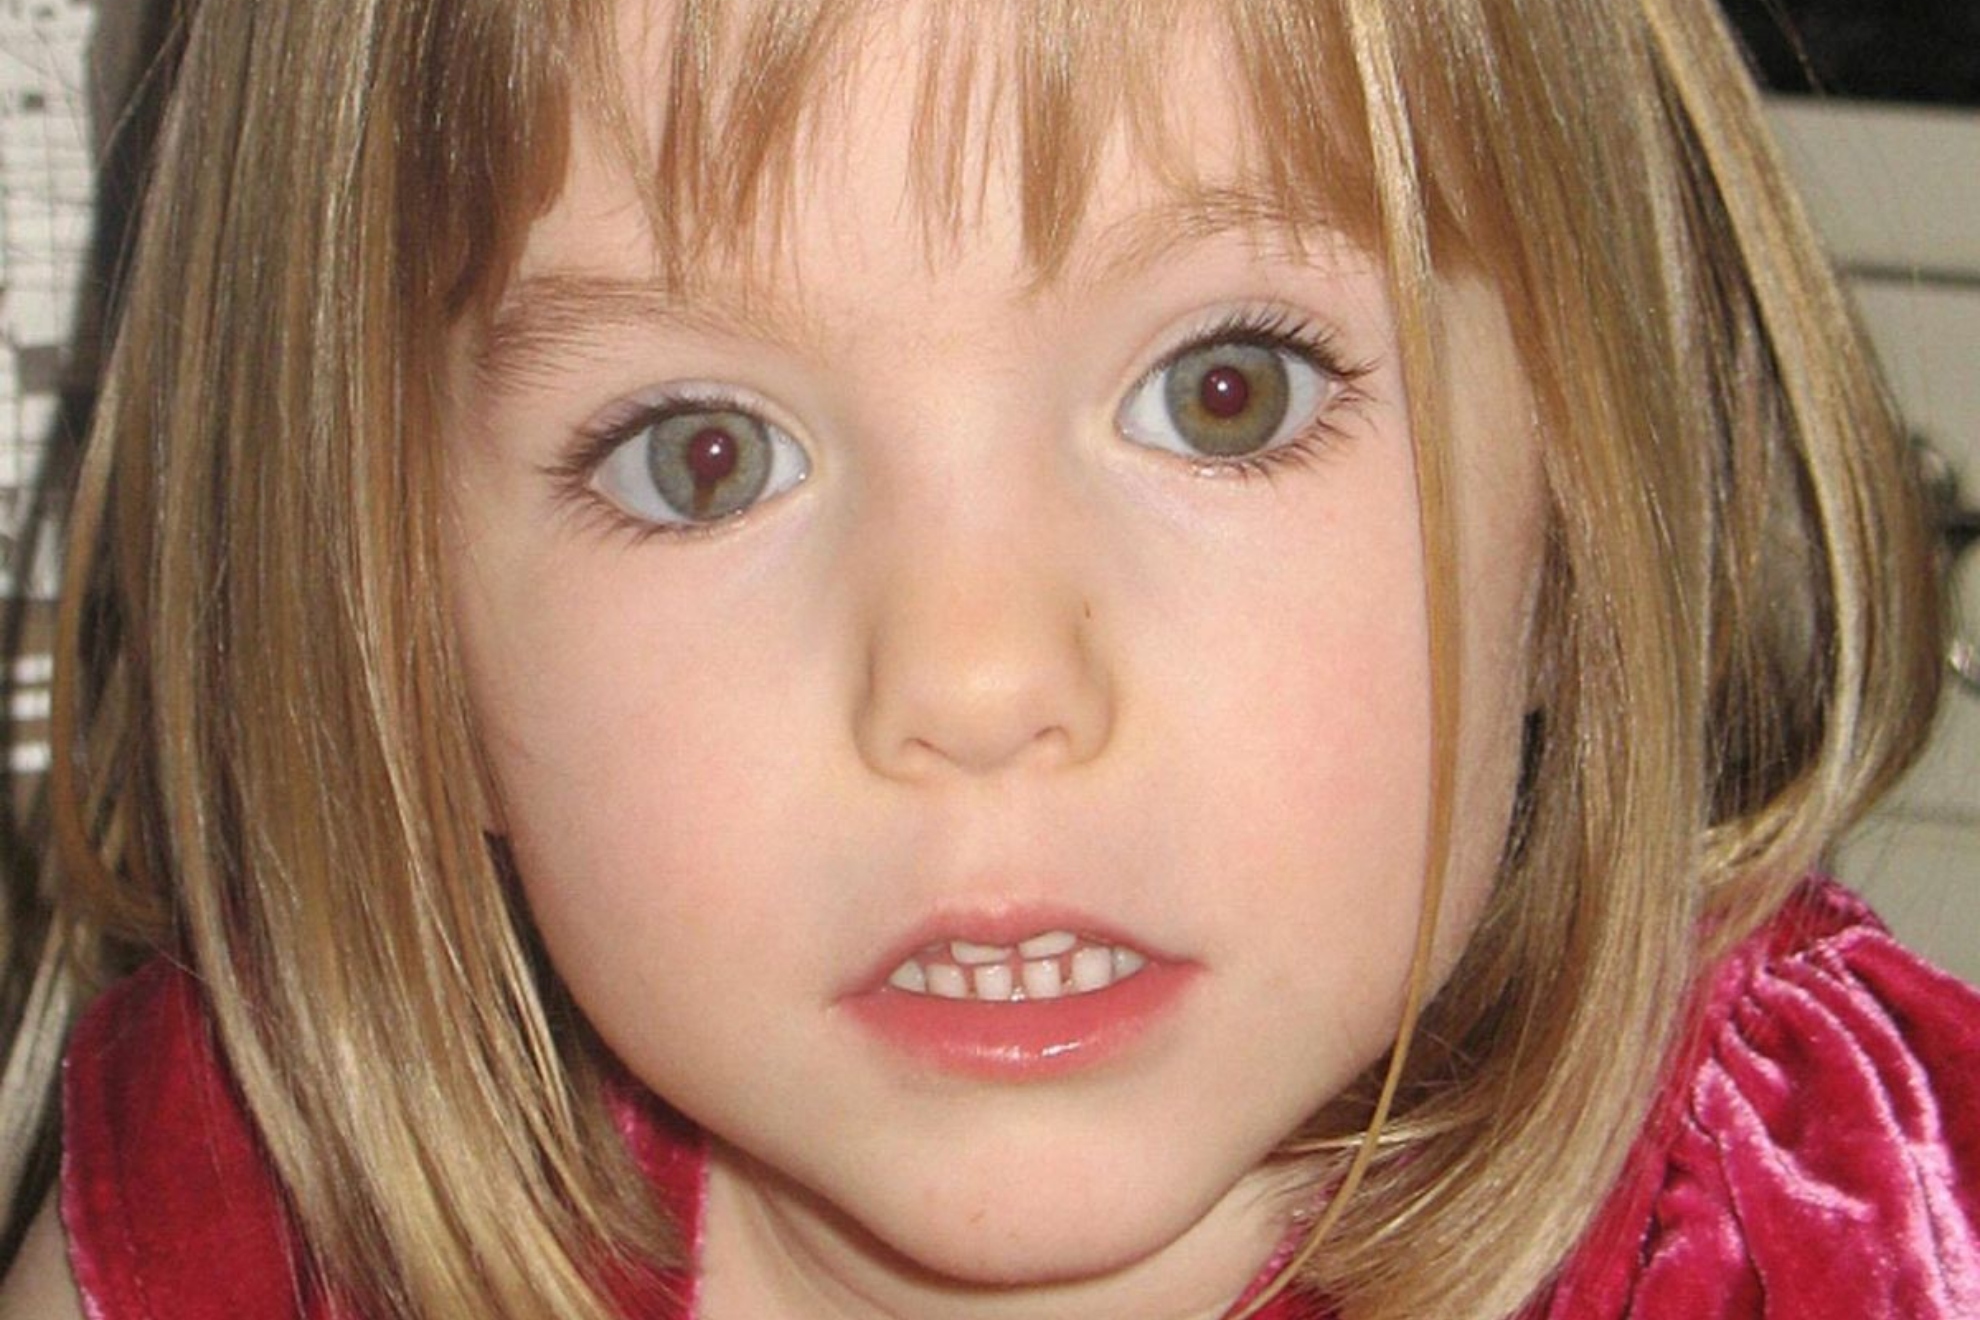 The McCann Family is looking to explore any avenue to find little Maddie